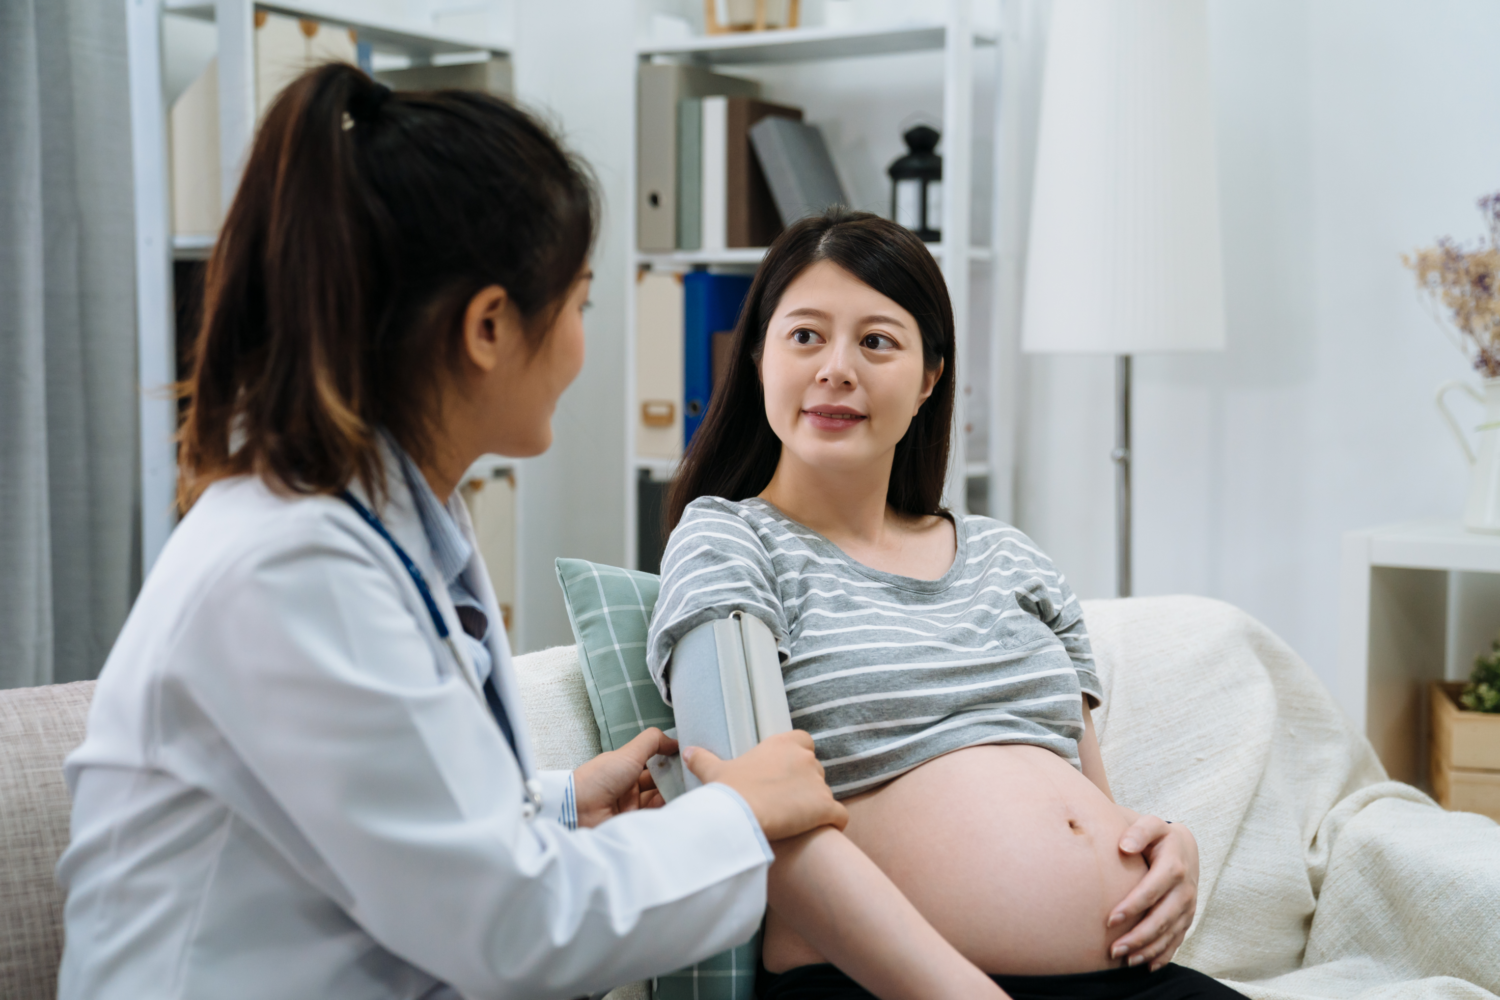 Blood pressure patterns in early pregnancy tied to later risk of pregnancy-related hypertension complications